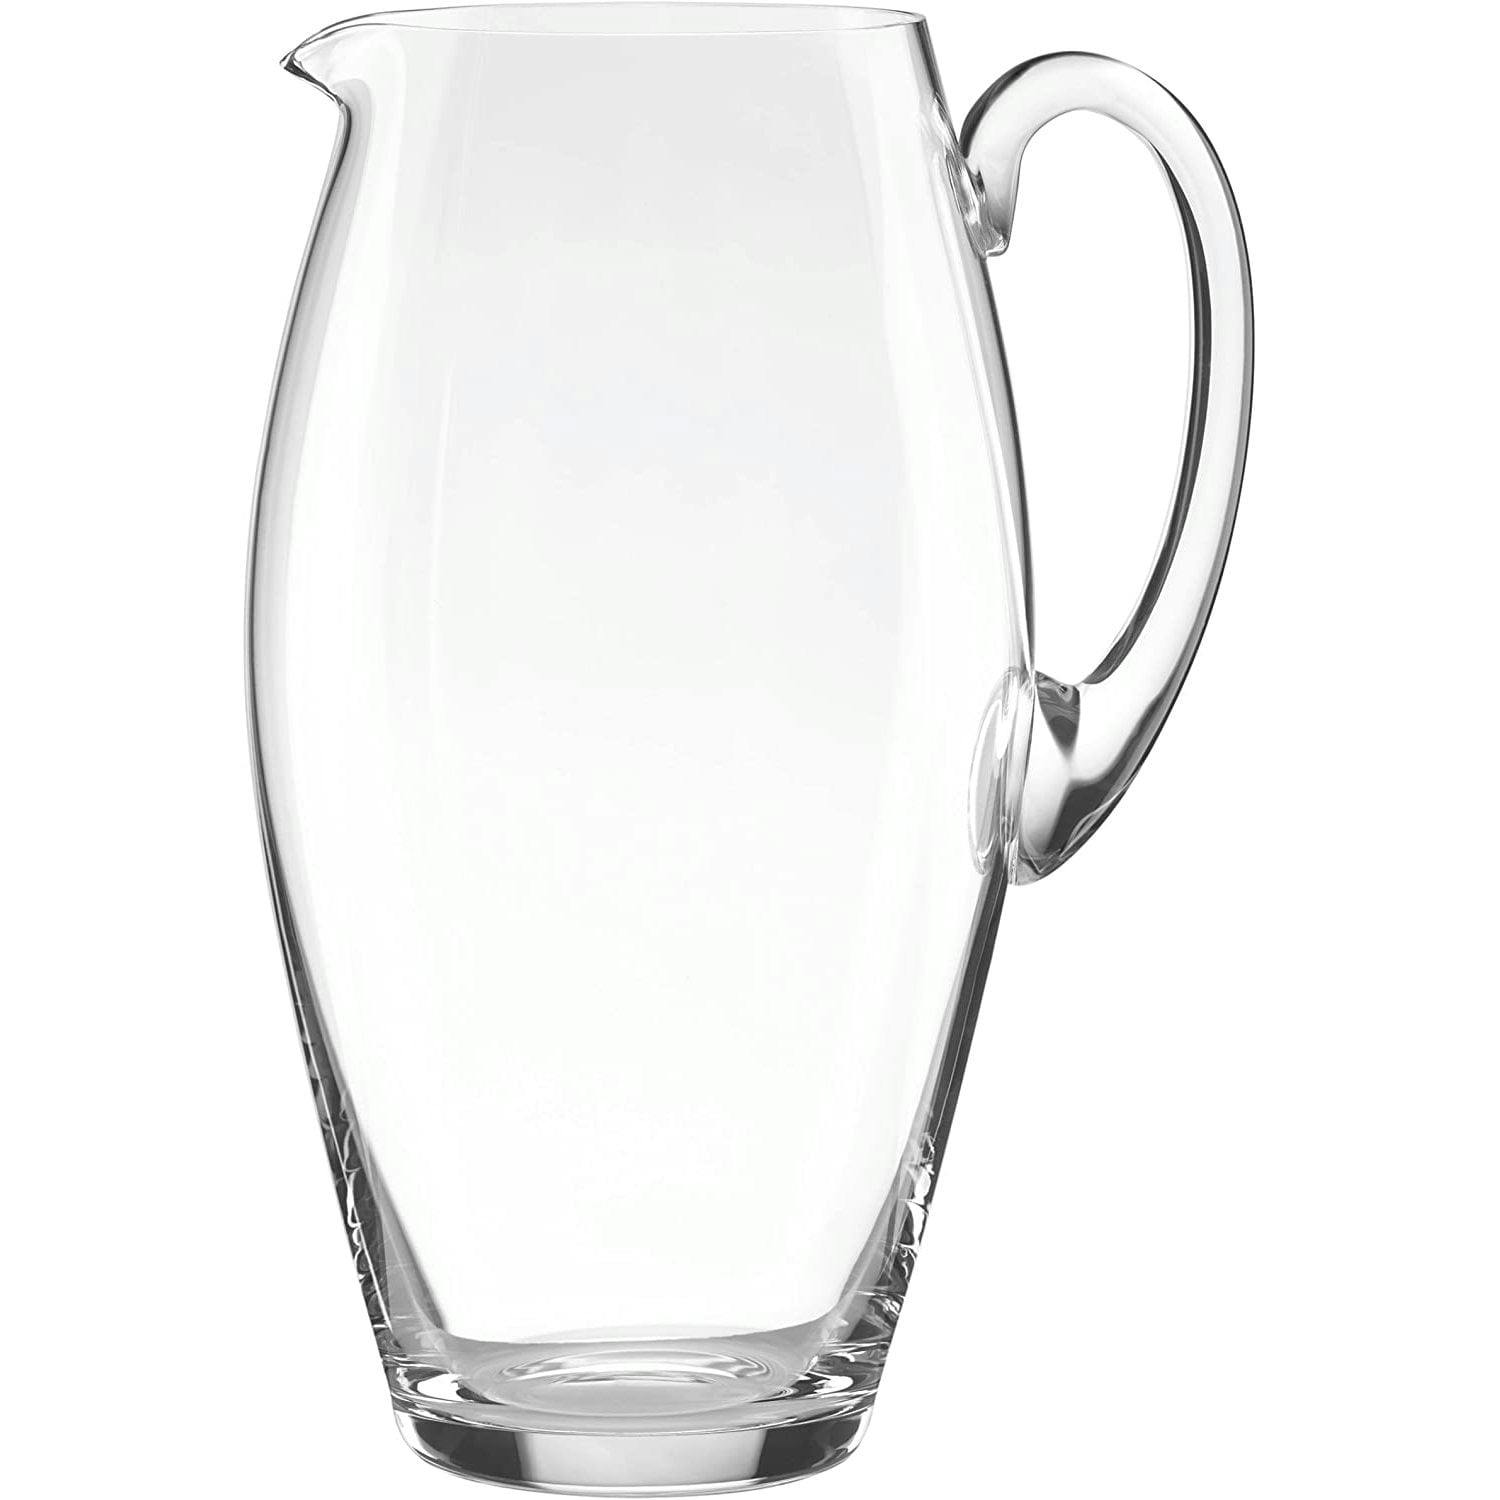 Elegant Tuscany 80 oz Clear Crystal Contemporary Pitcher